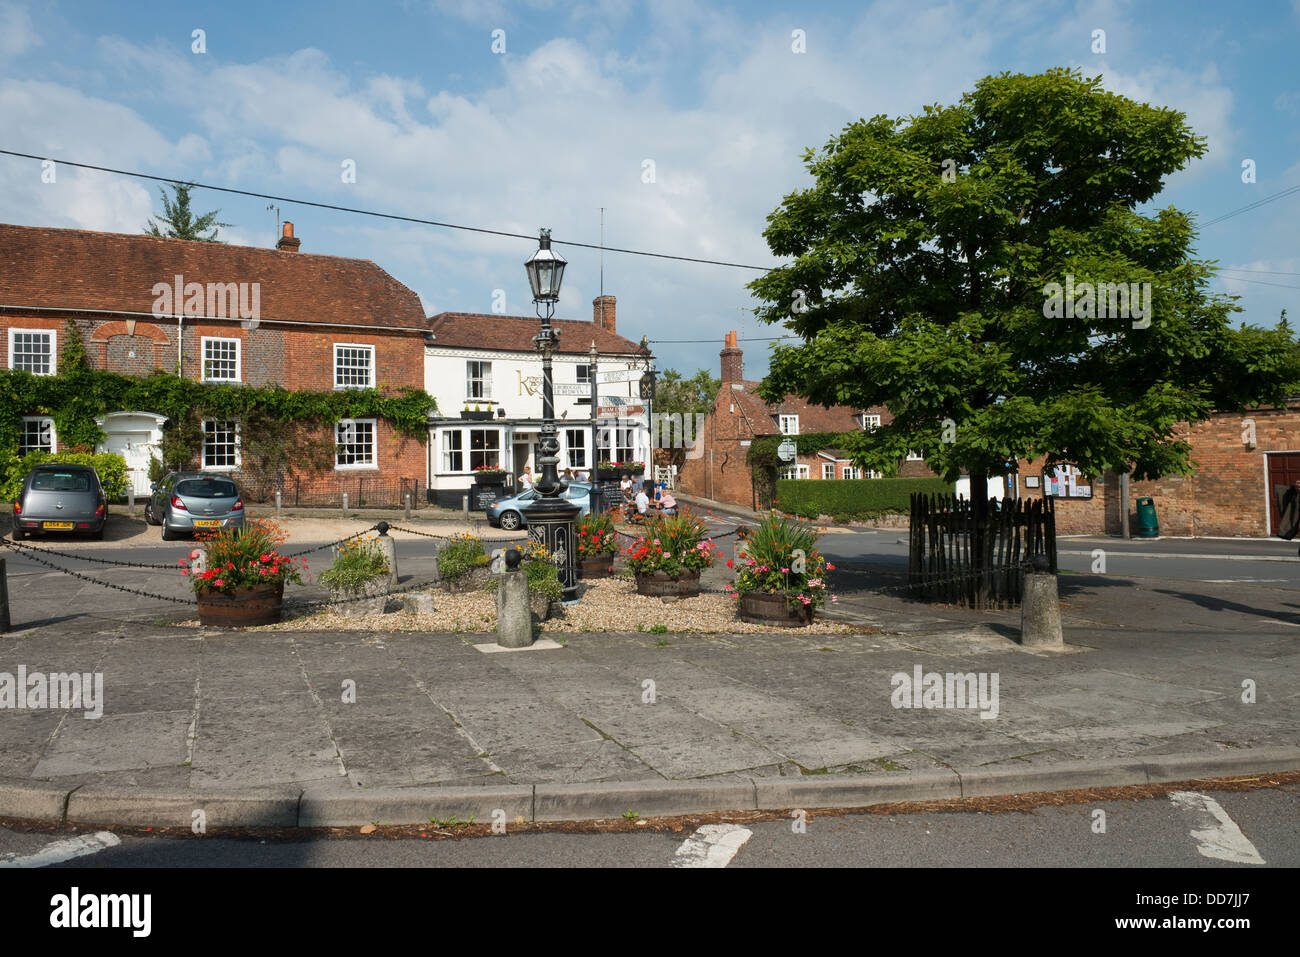 Village Square, Great Bedwyn, Wiltshire -1 Stock Photo